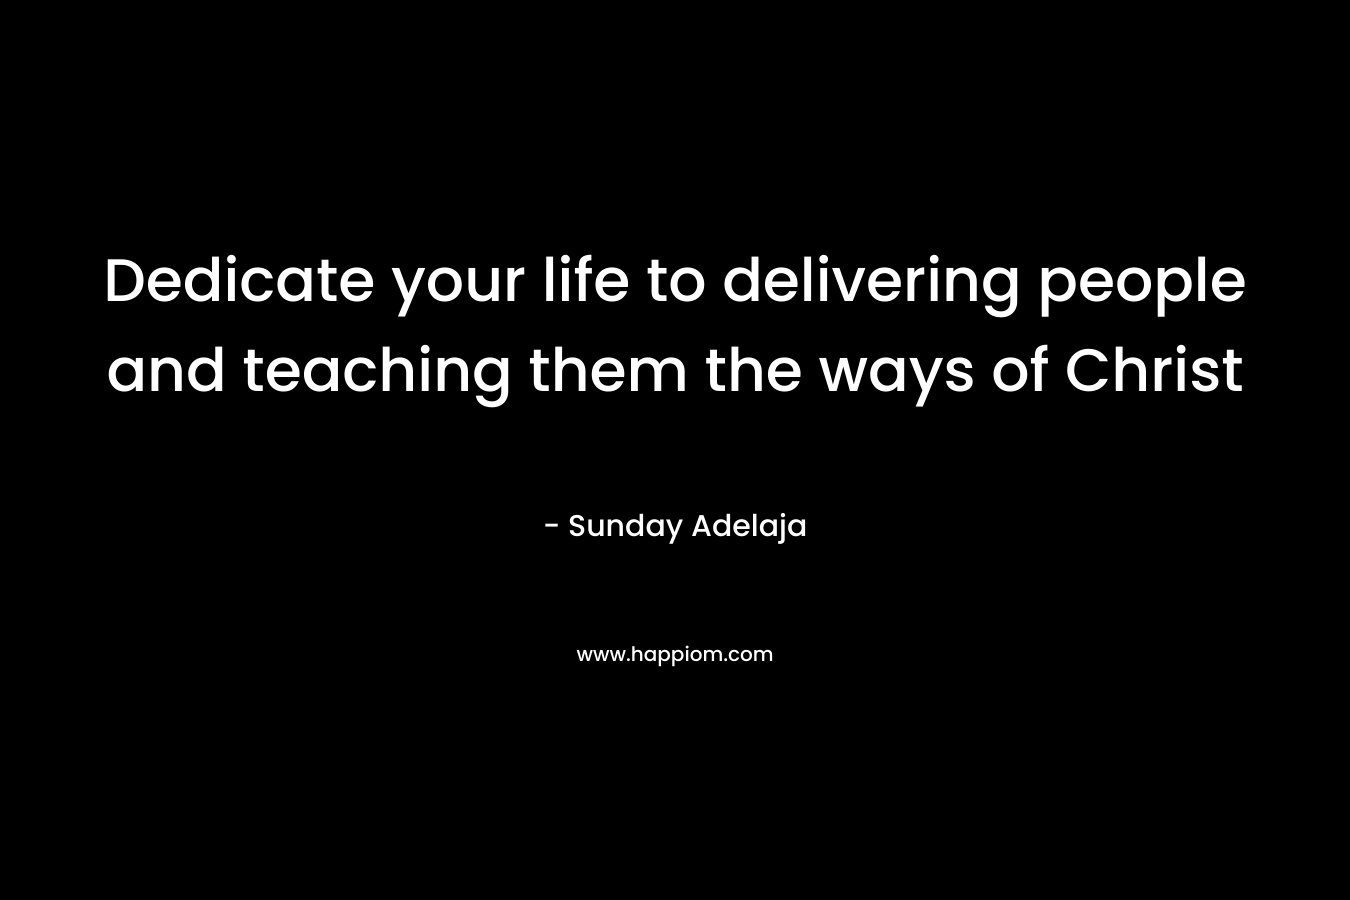 Dedicate your life to delivering people and teaching them the ways of Christ